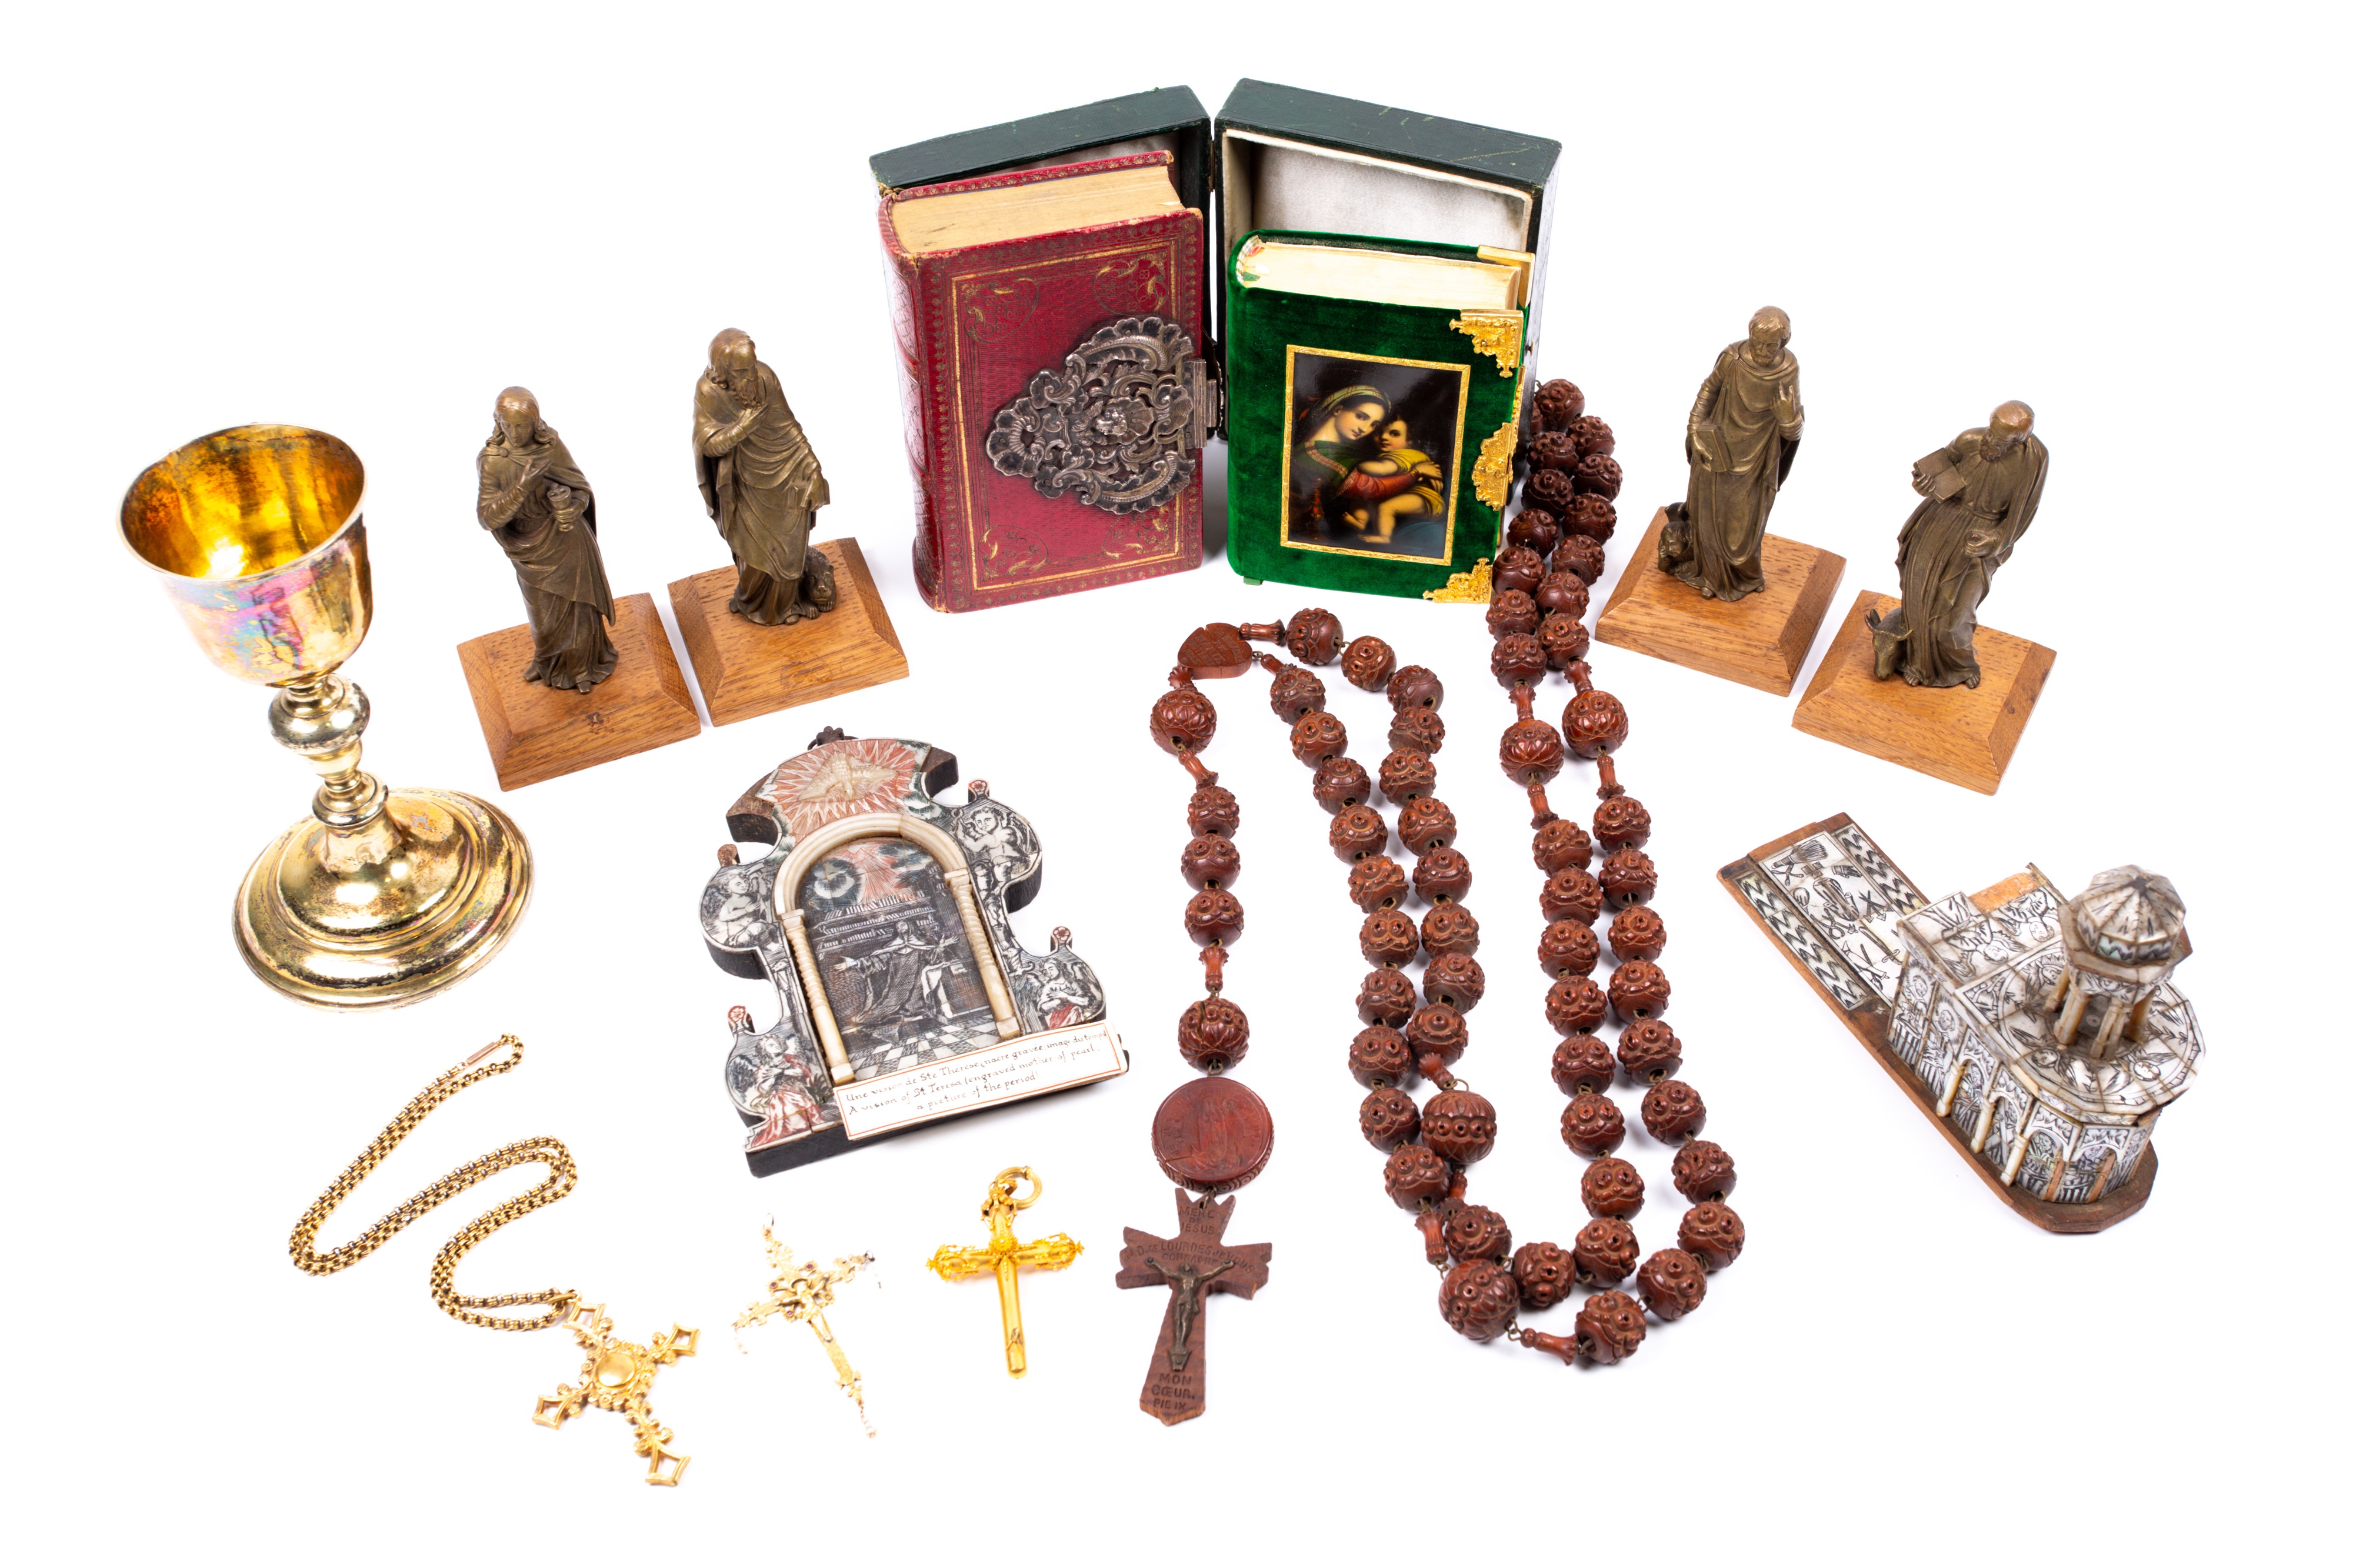 A selection of the religious items coming up for auction at Dawsons